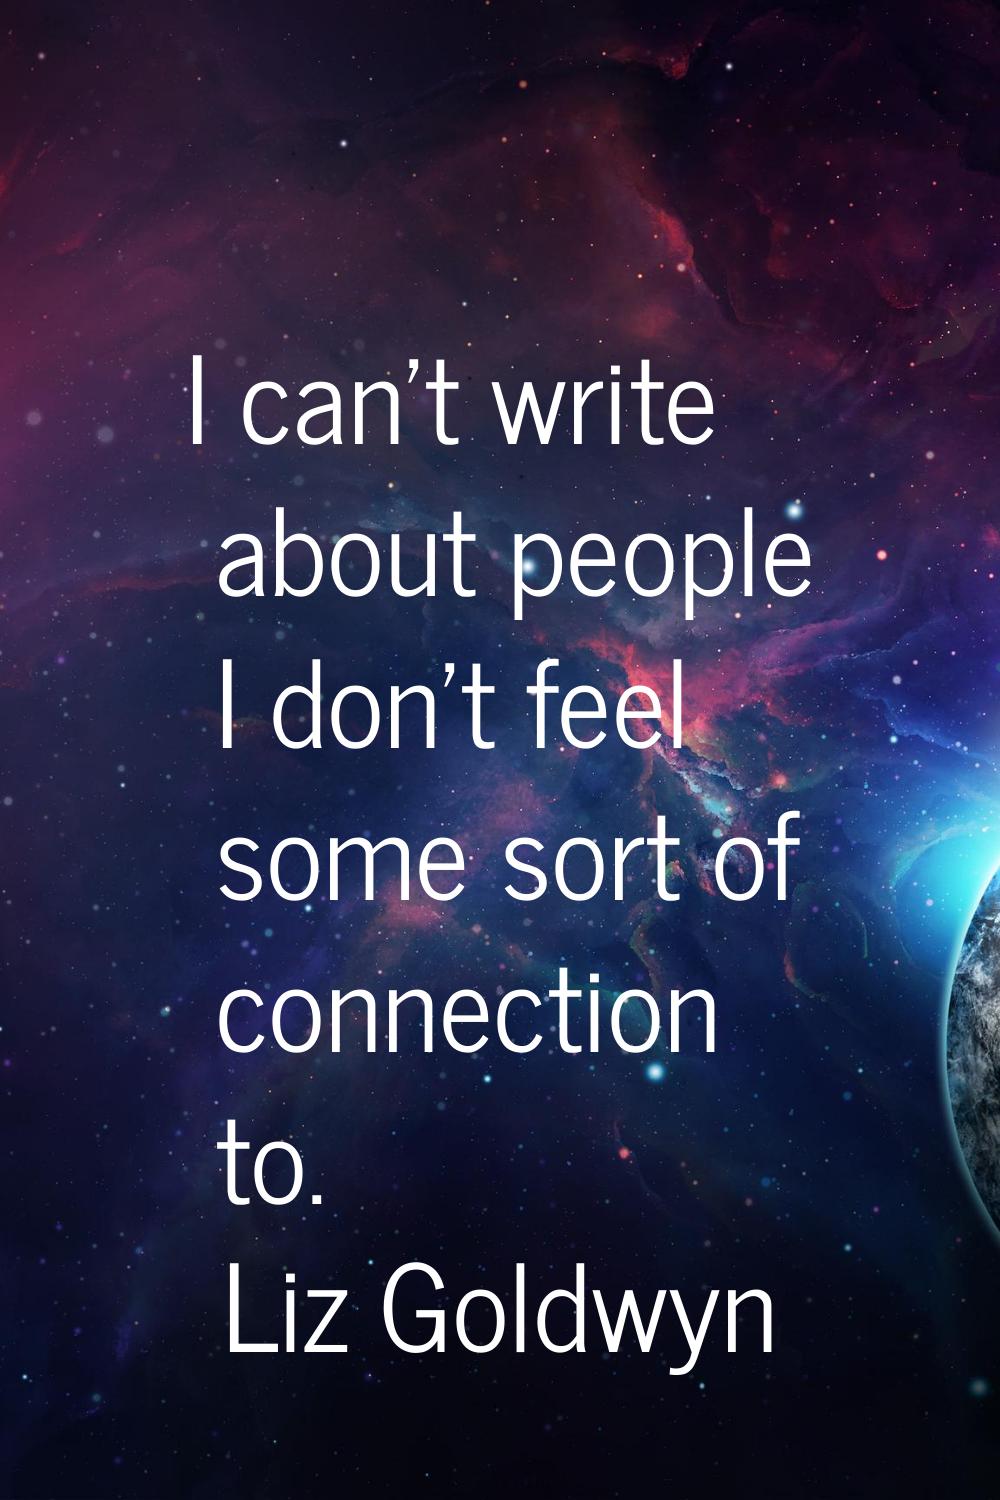 I can't write about people I don't feel some sort of connection to.